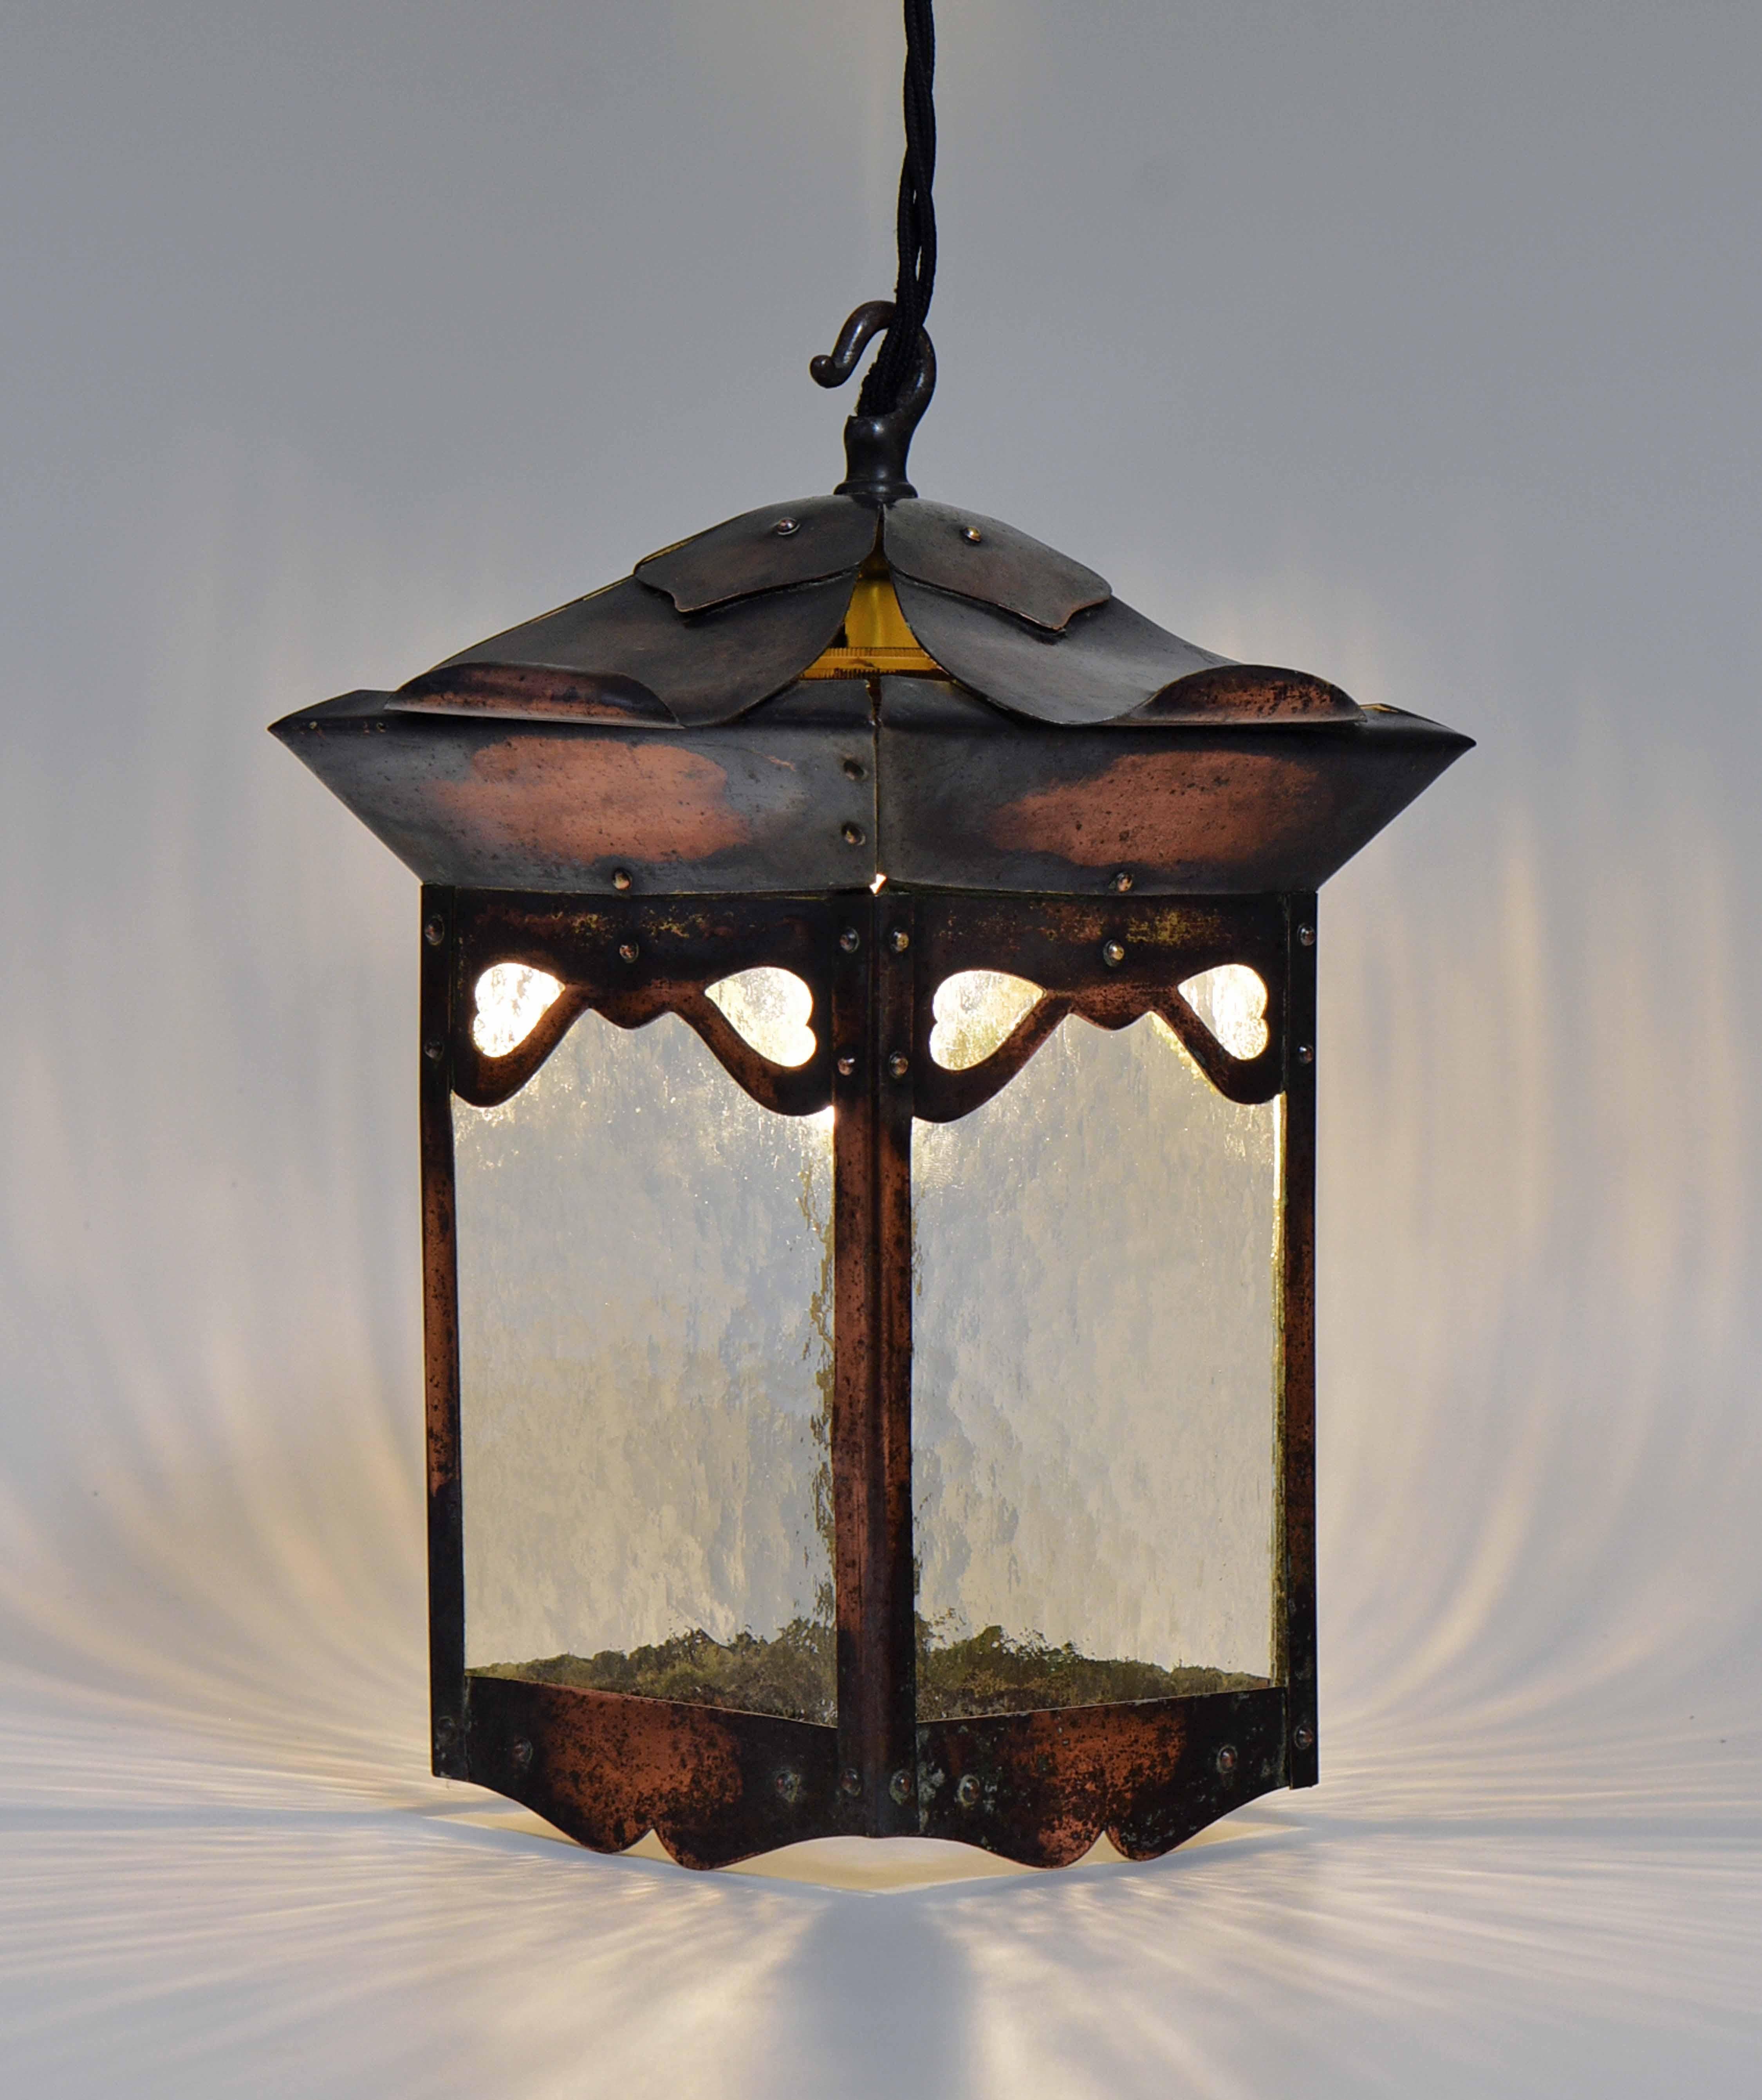 An attractive Arts and Crafts copperised, pressed-metal hall lantern with heart shaped design. Circa 1900.

Free delivery to the UK via a selected parcel company.

The lantern has been re-wired by a competent electrician, with a British plug. It